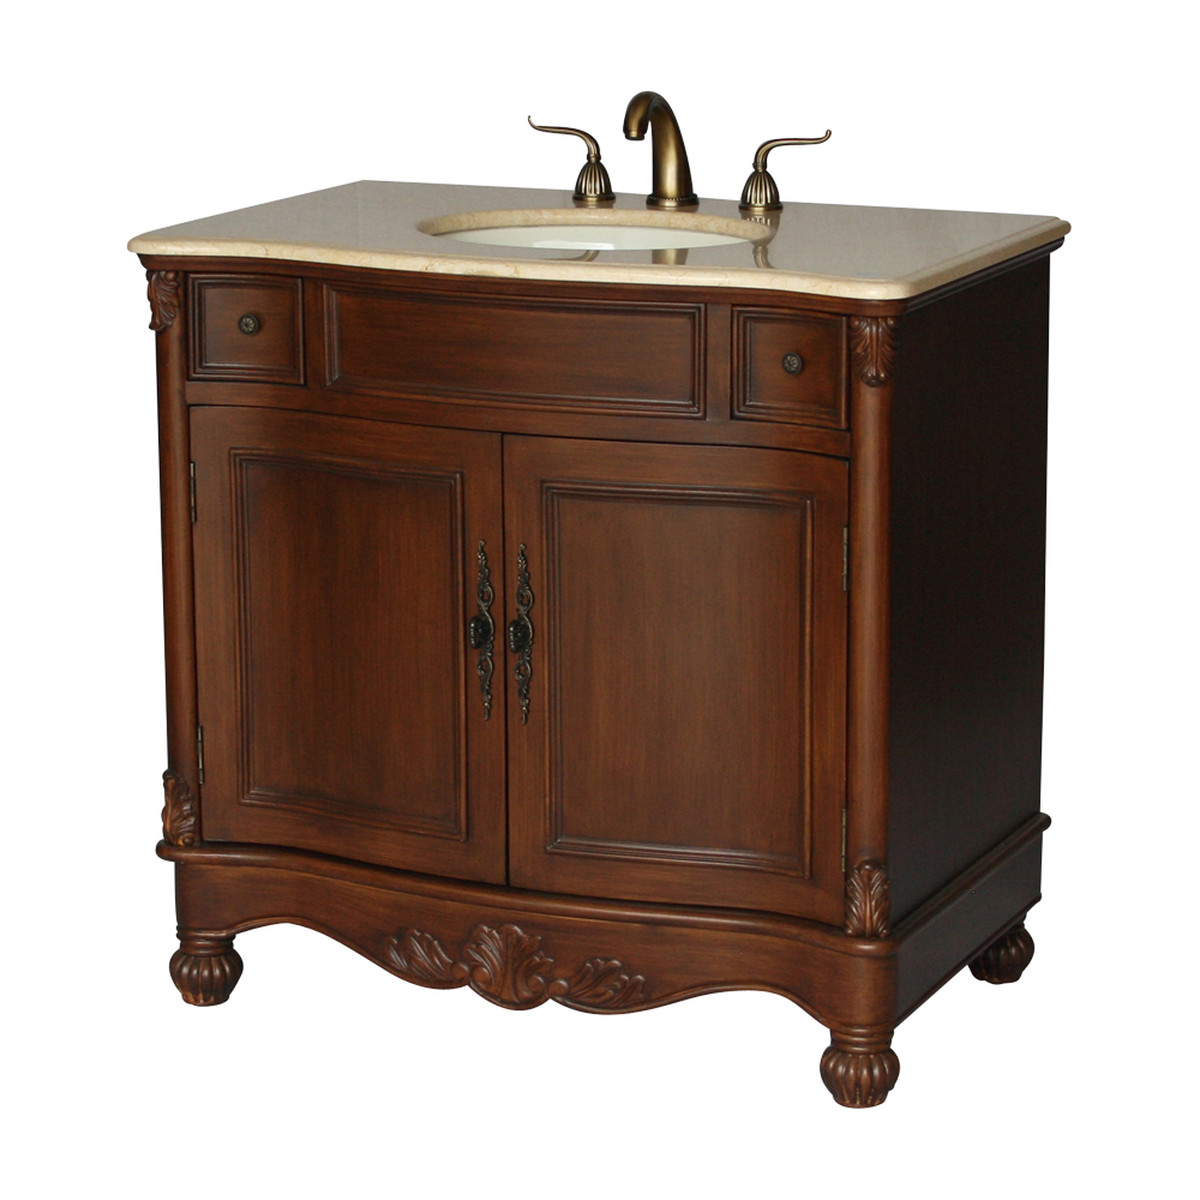 36" Adelina Antique Style Single Sink Bathroom Vanity with Beige Stone Countertop and Walnut Finish